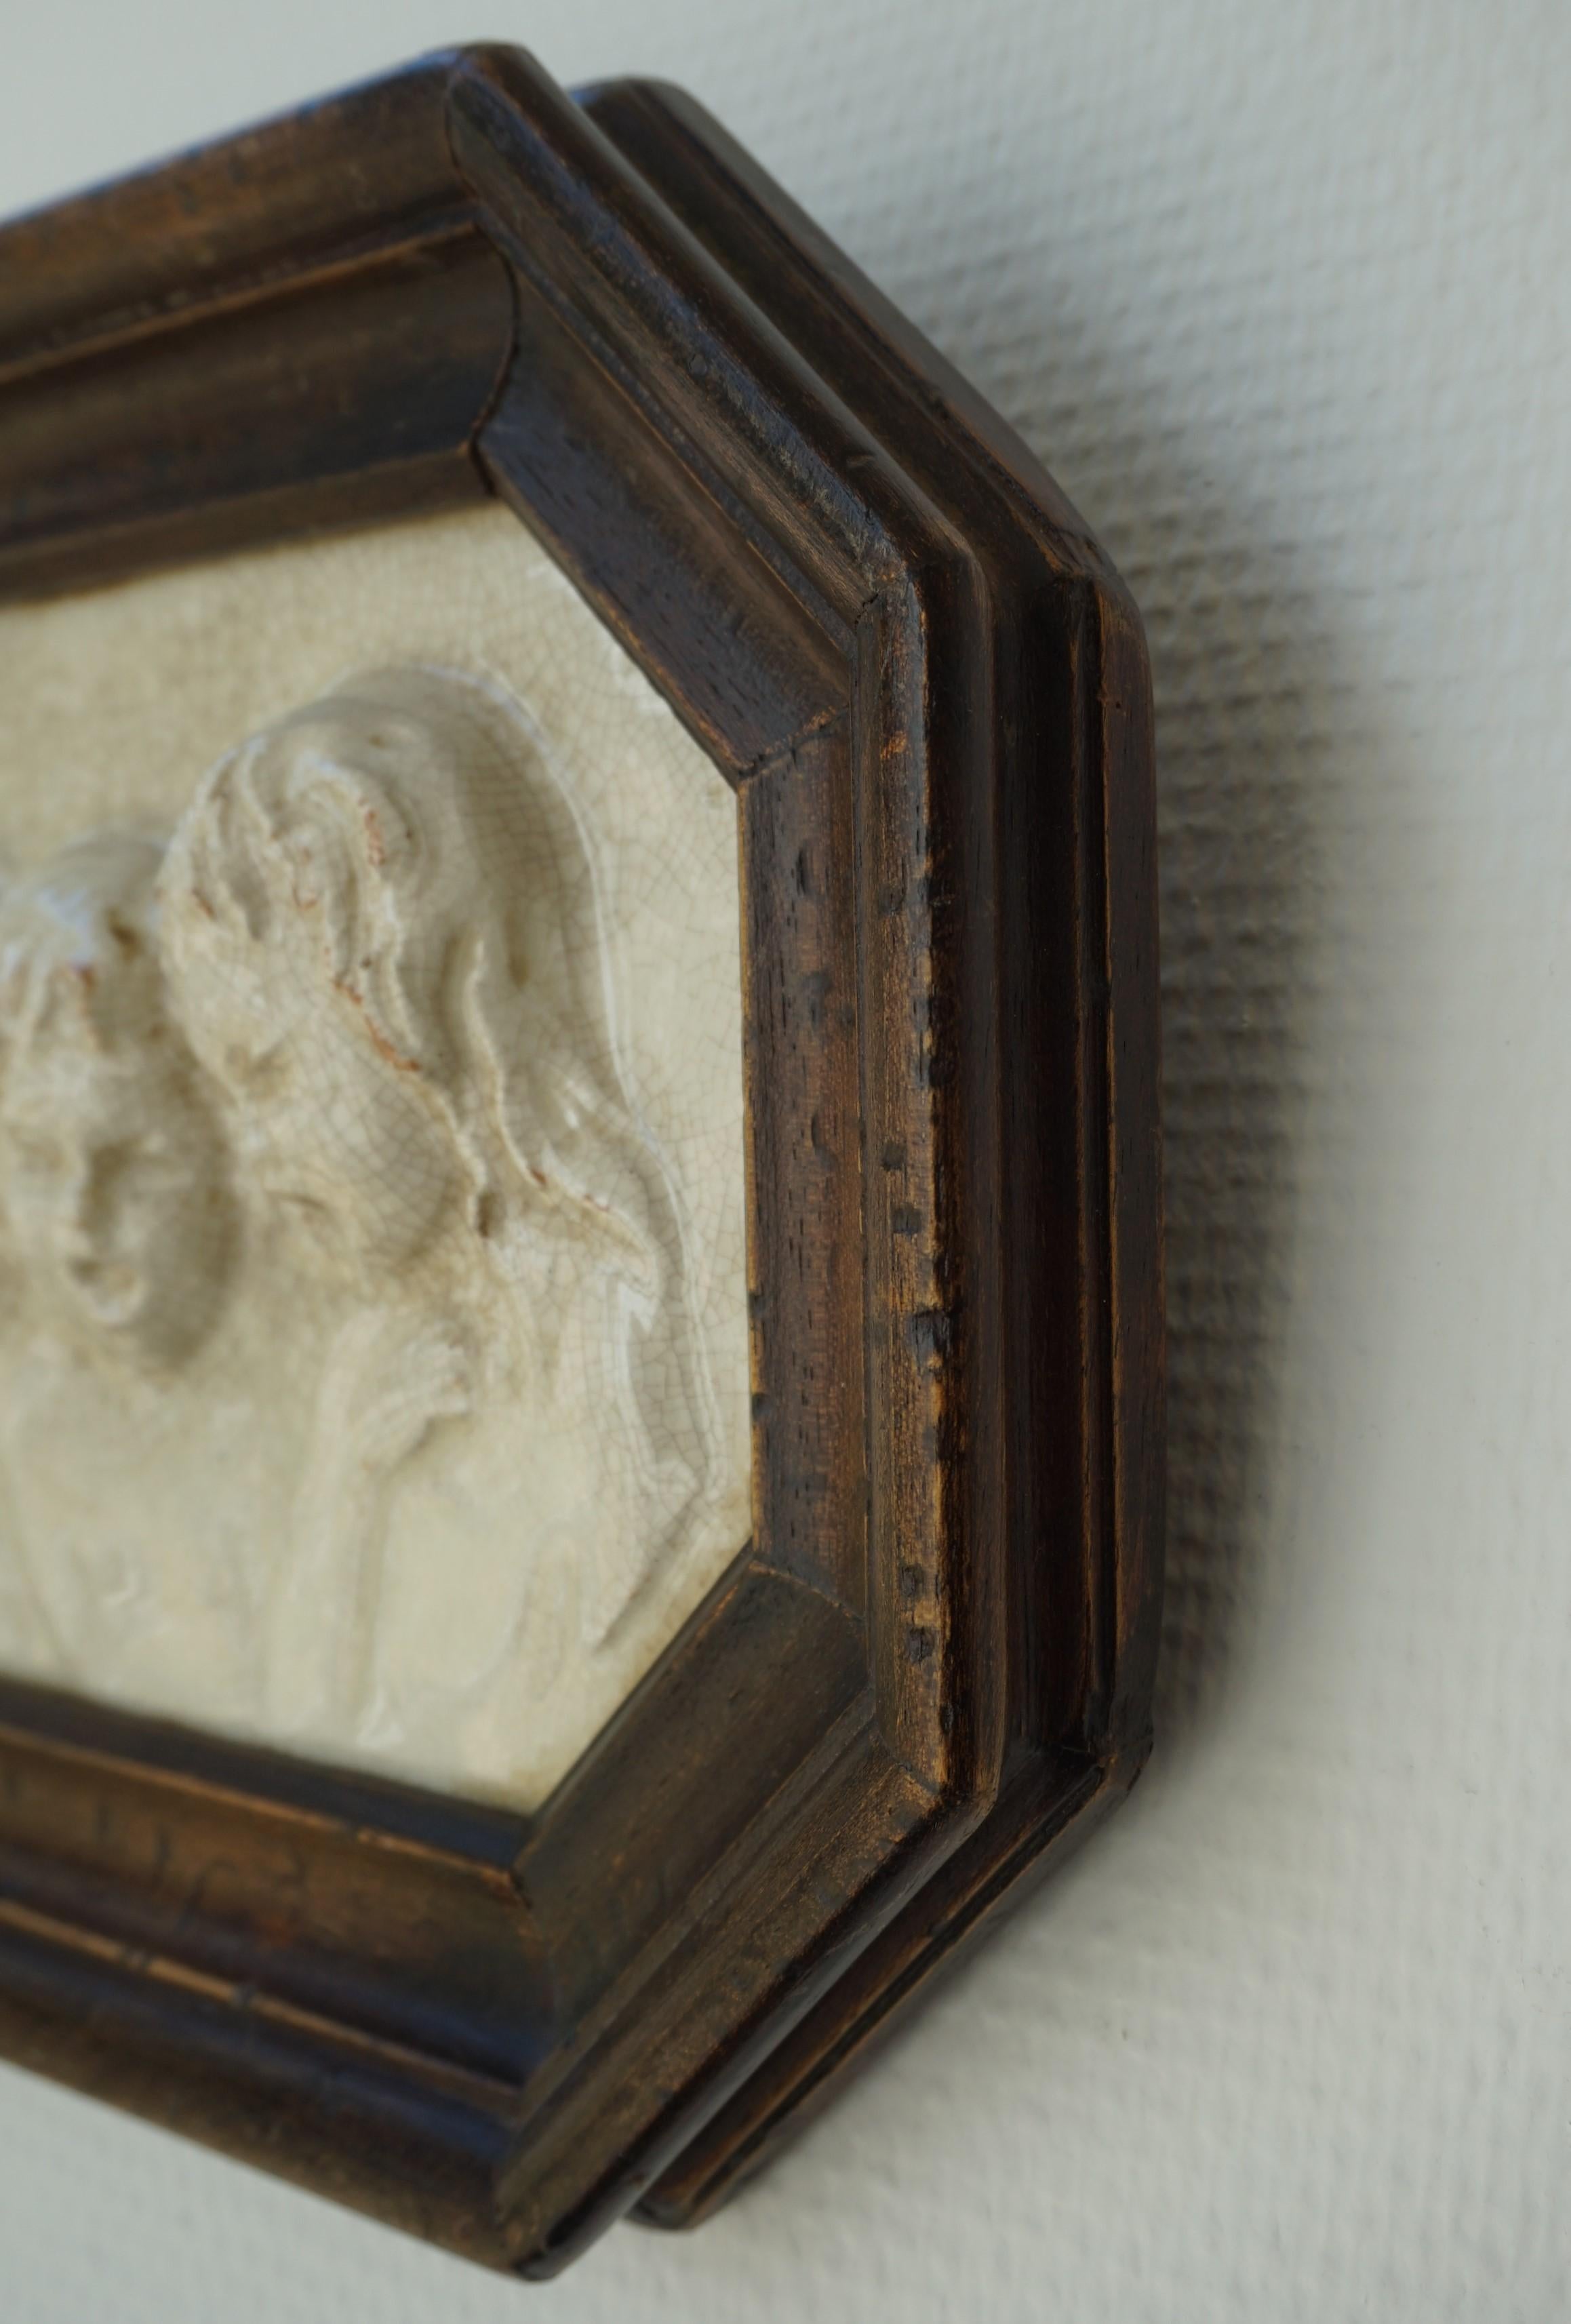 Glazed Antique Tile in Frame with Devout Singing Angelic Children Sculptures in Relief For Sale